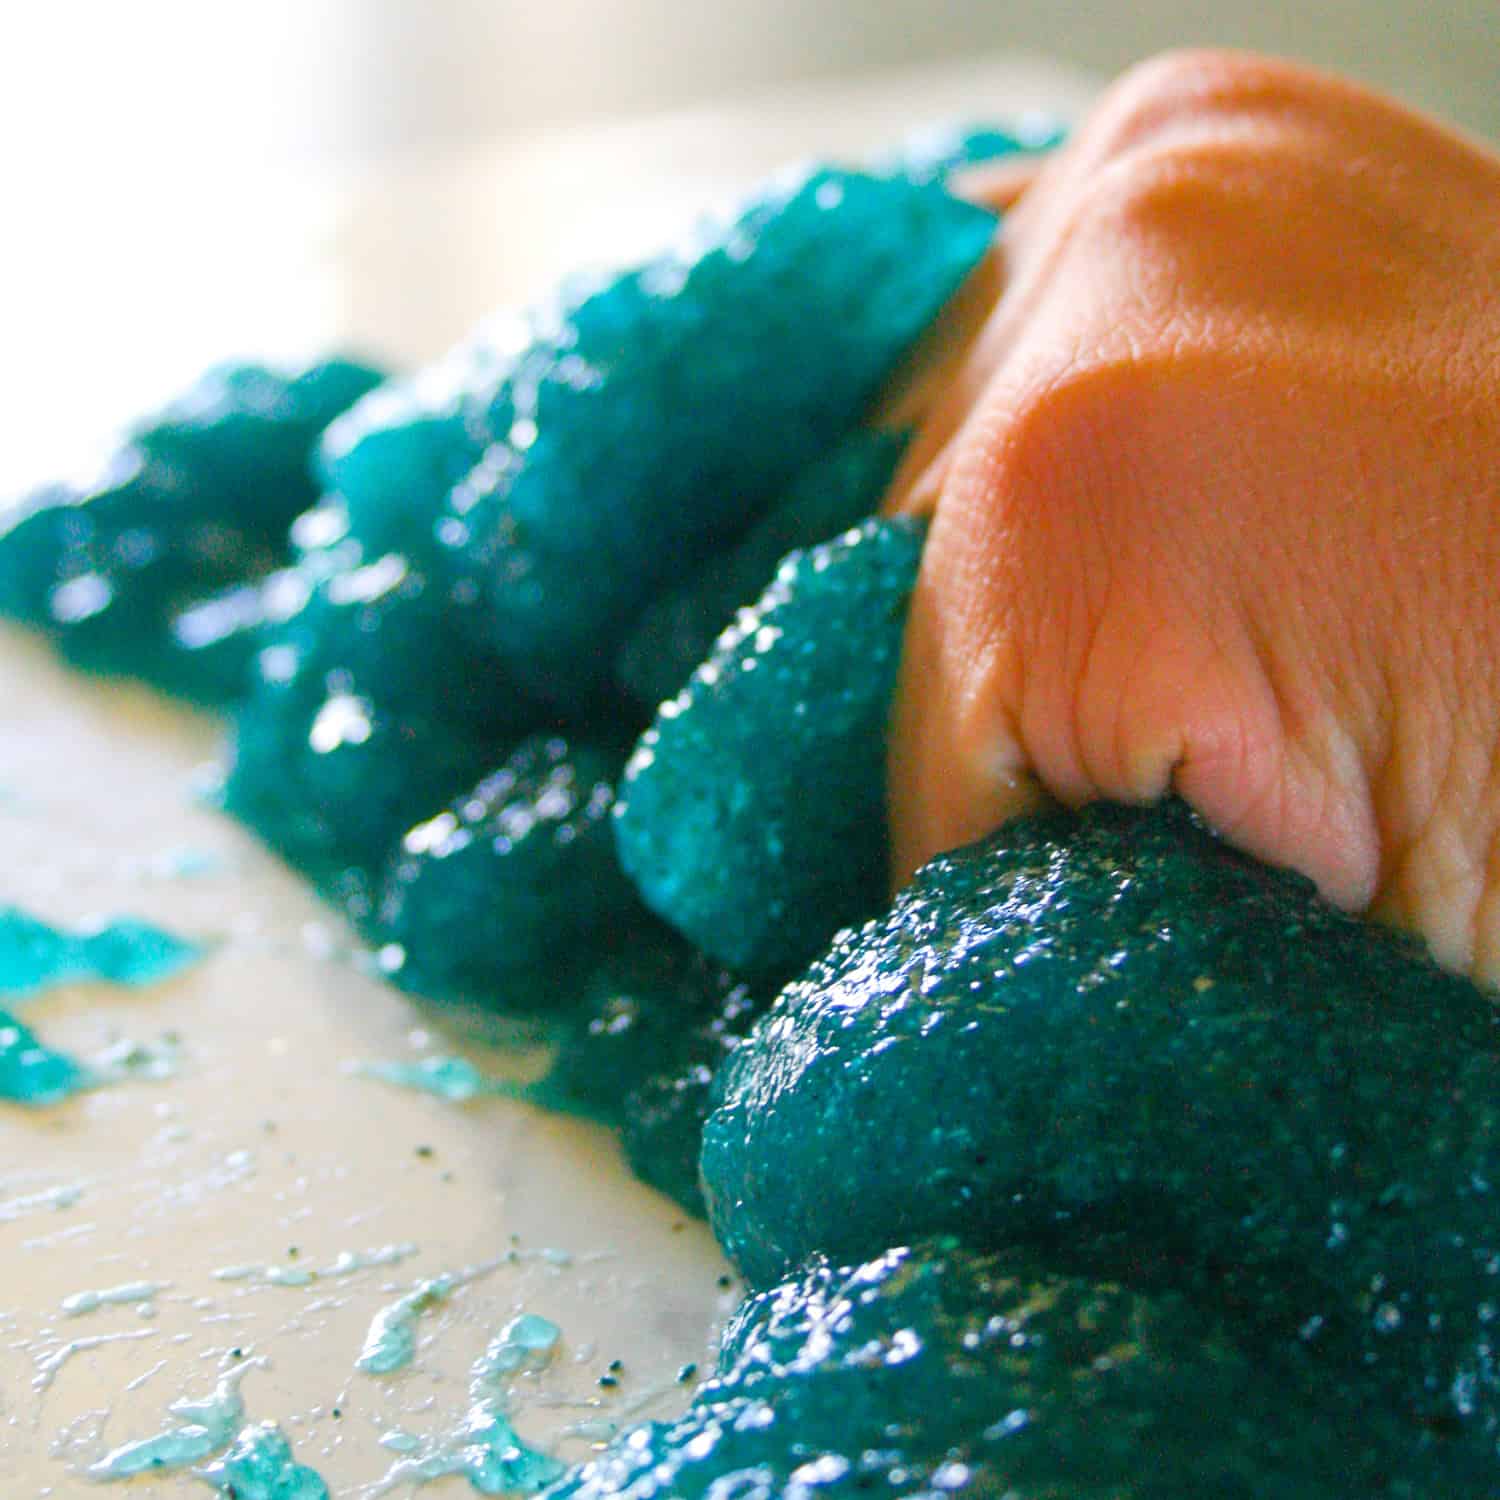 How to Make Non Toxic Slime. No Borax. No Glue. Only TWO Ingredients. This stuff is Amazing!!!!